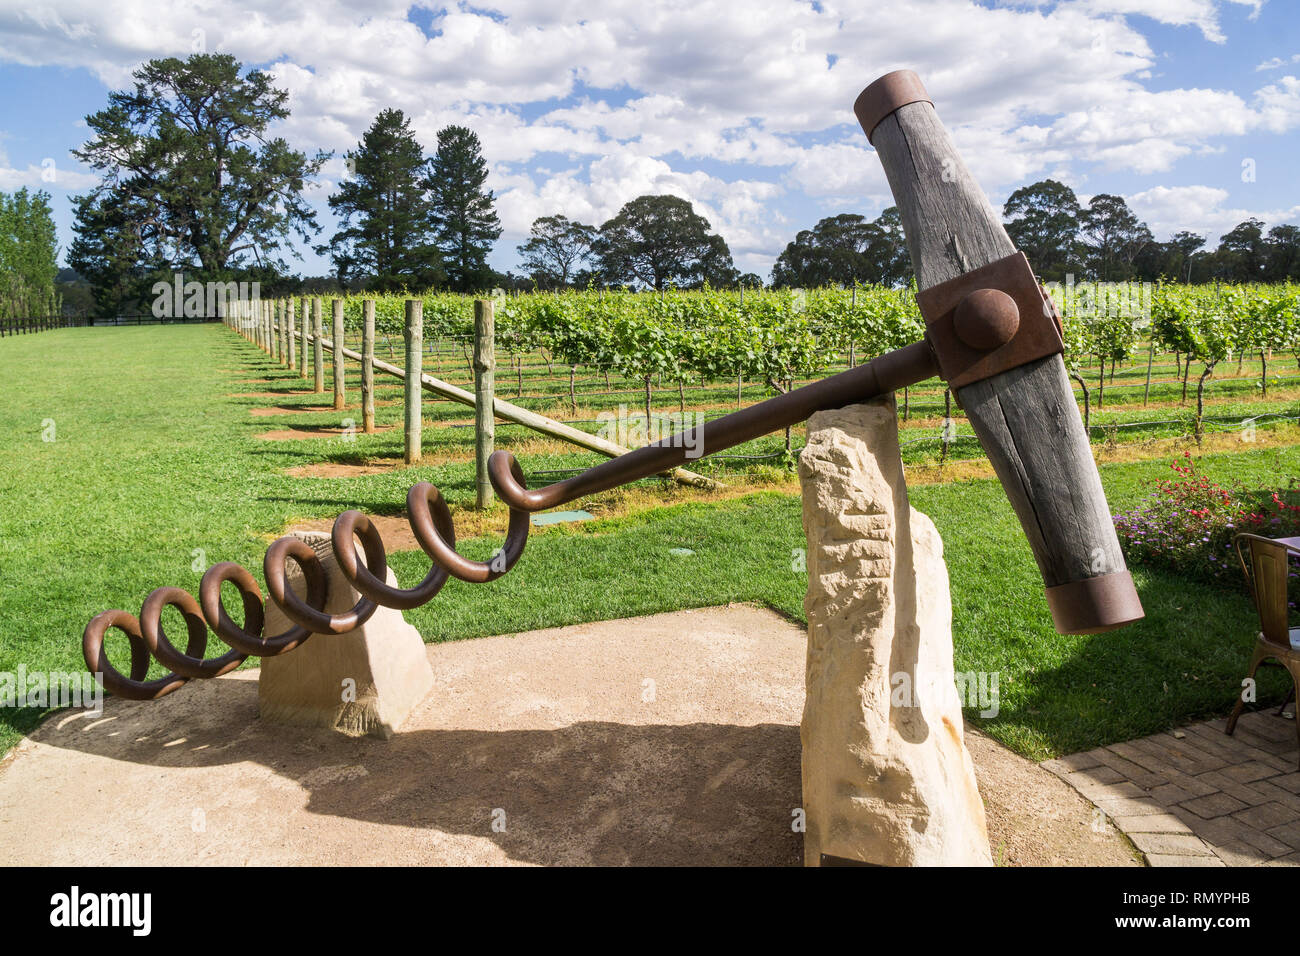 The Big Corkscrew at the Bendooley Estate in New South Wales, a vineyard estate that hosts the Berkelouw Book Barn Stock Photo